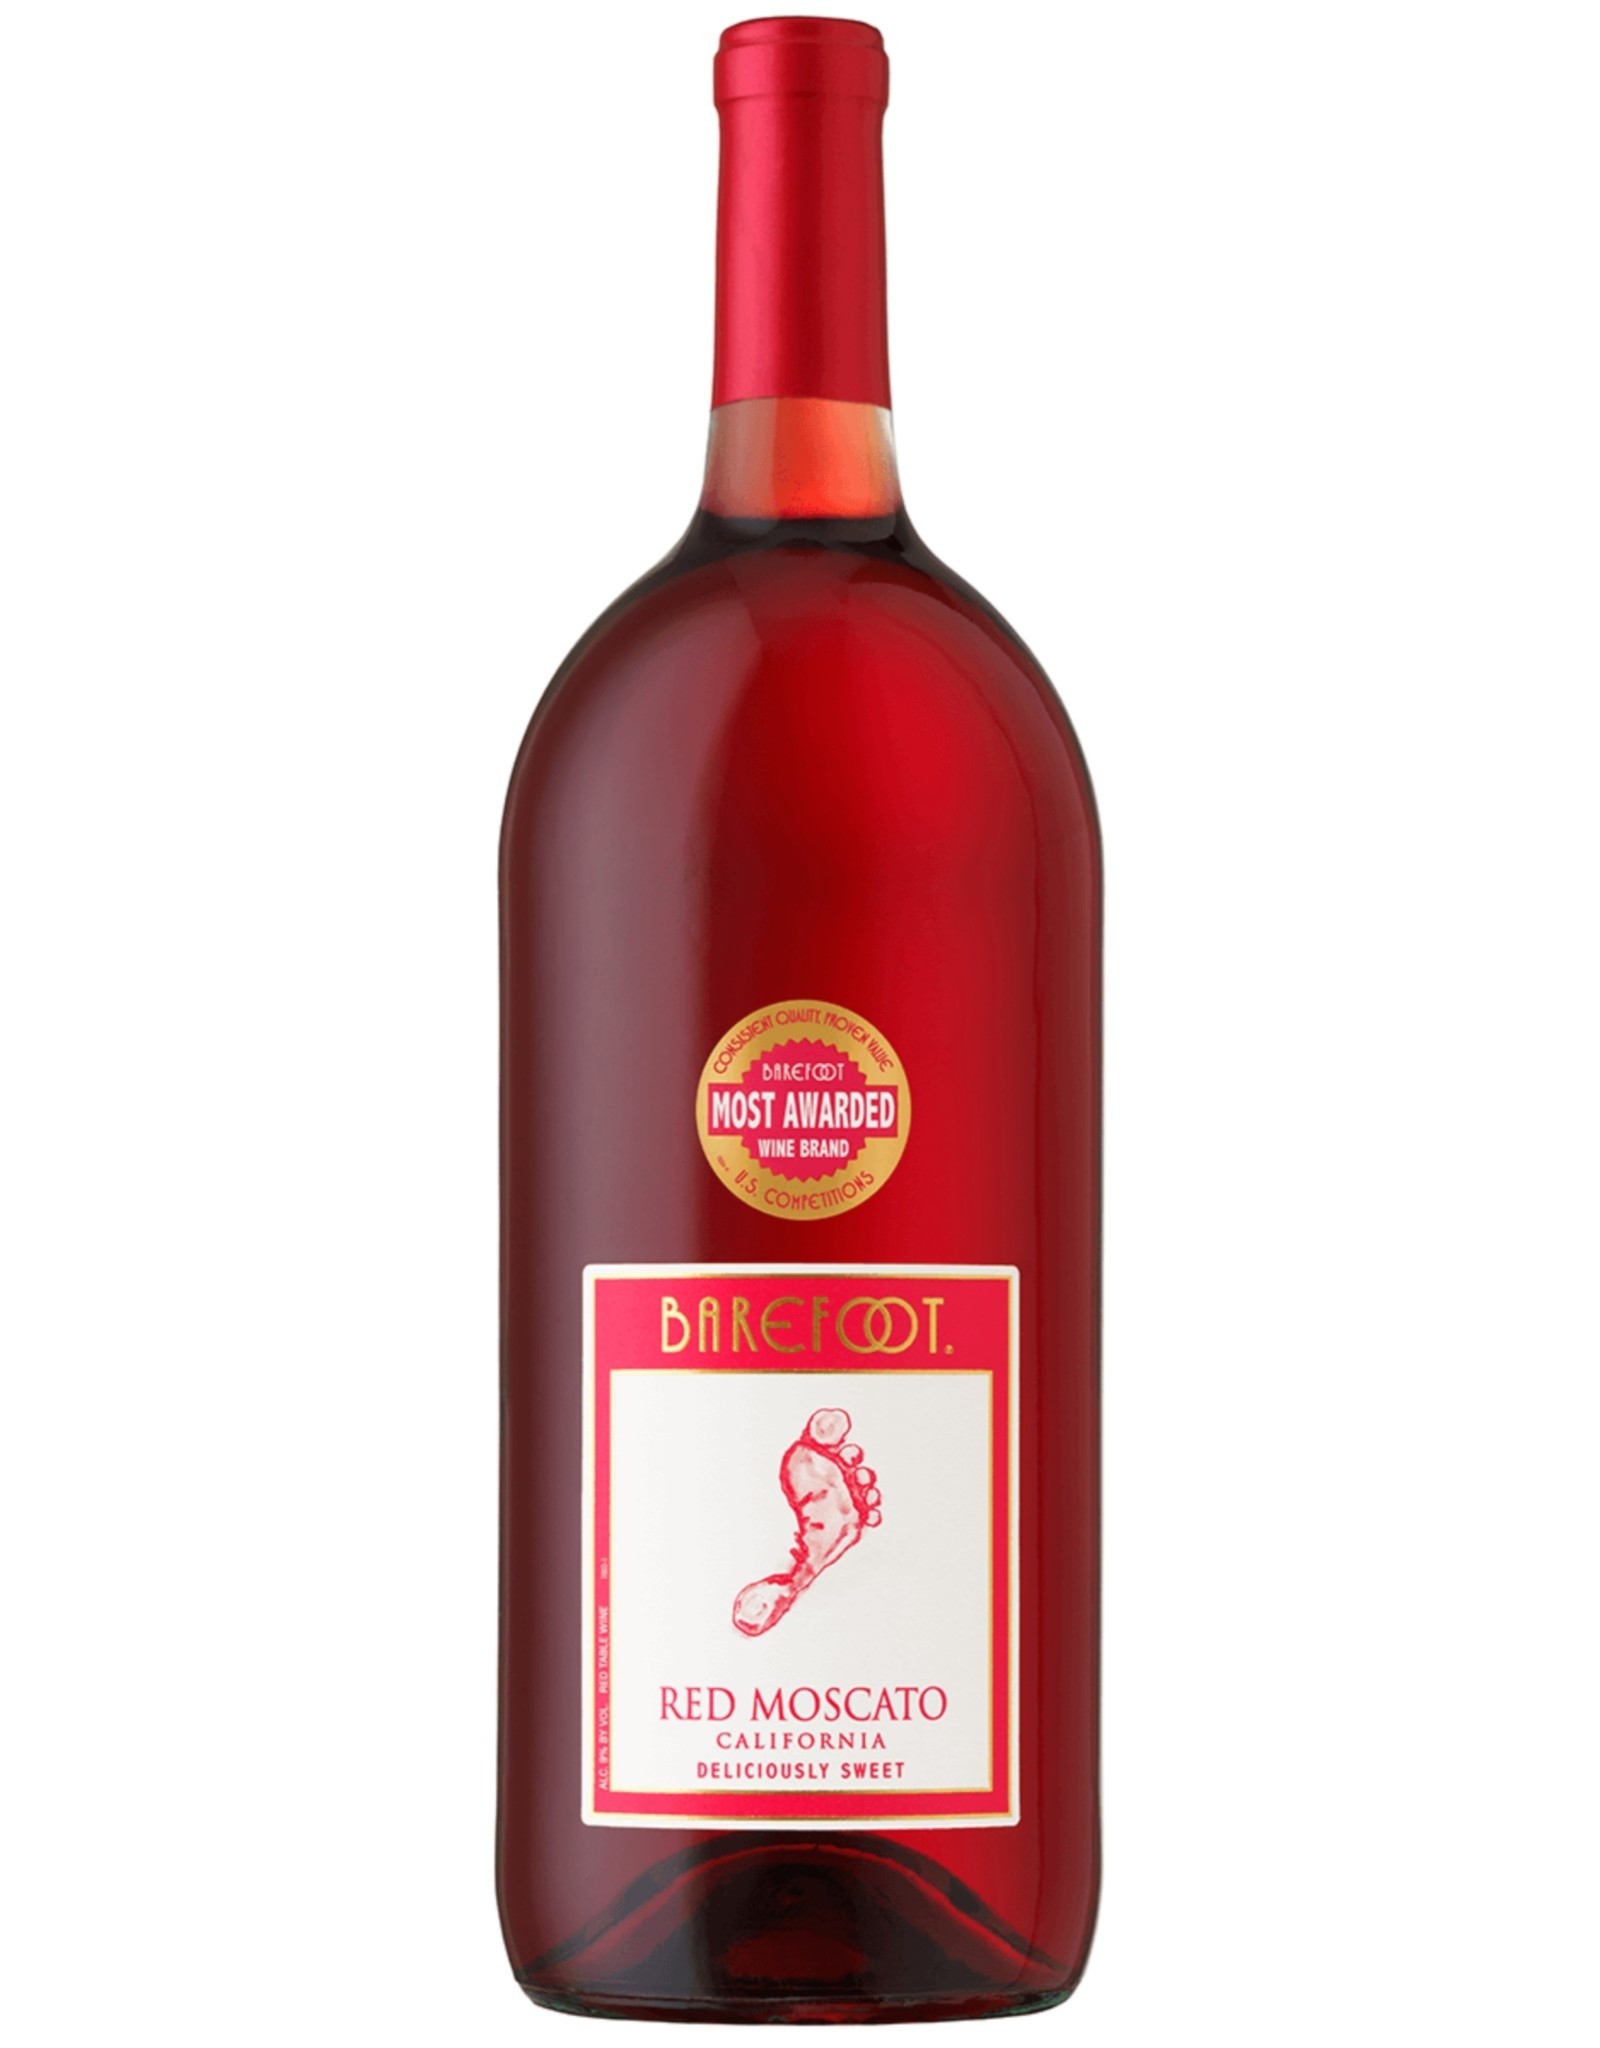 Barefoot Barefoot - Red Moscato - 1.5L